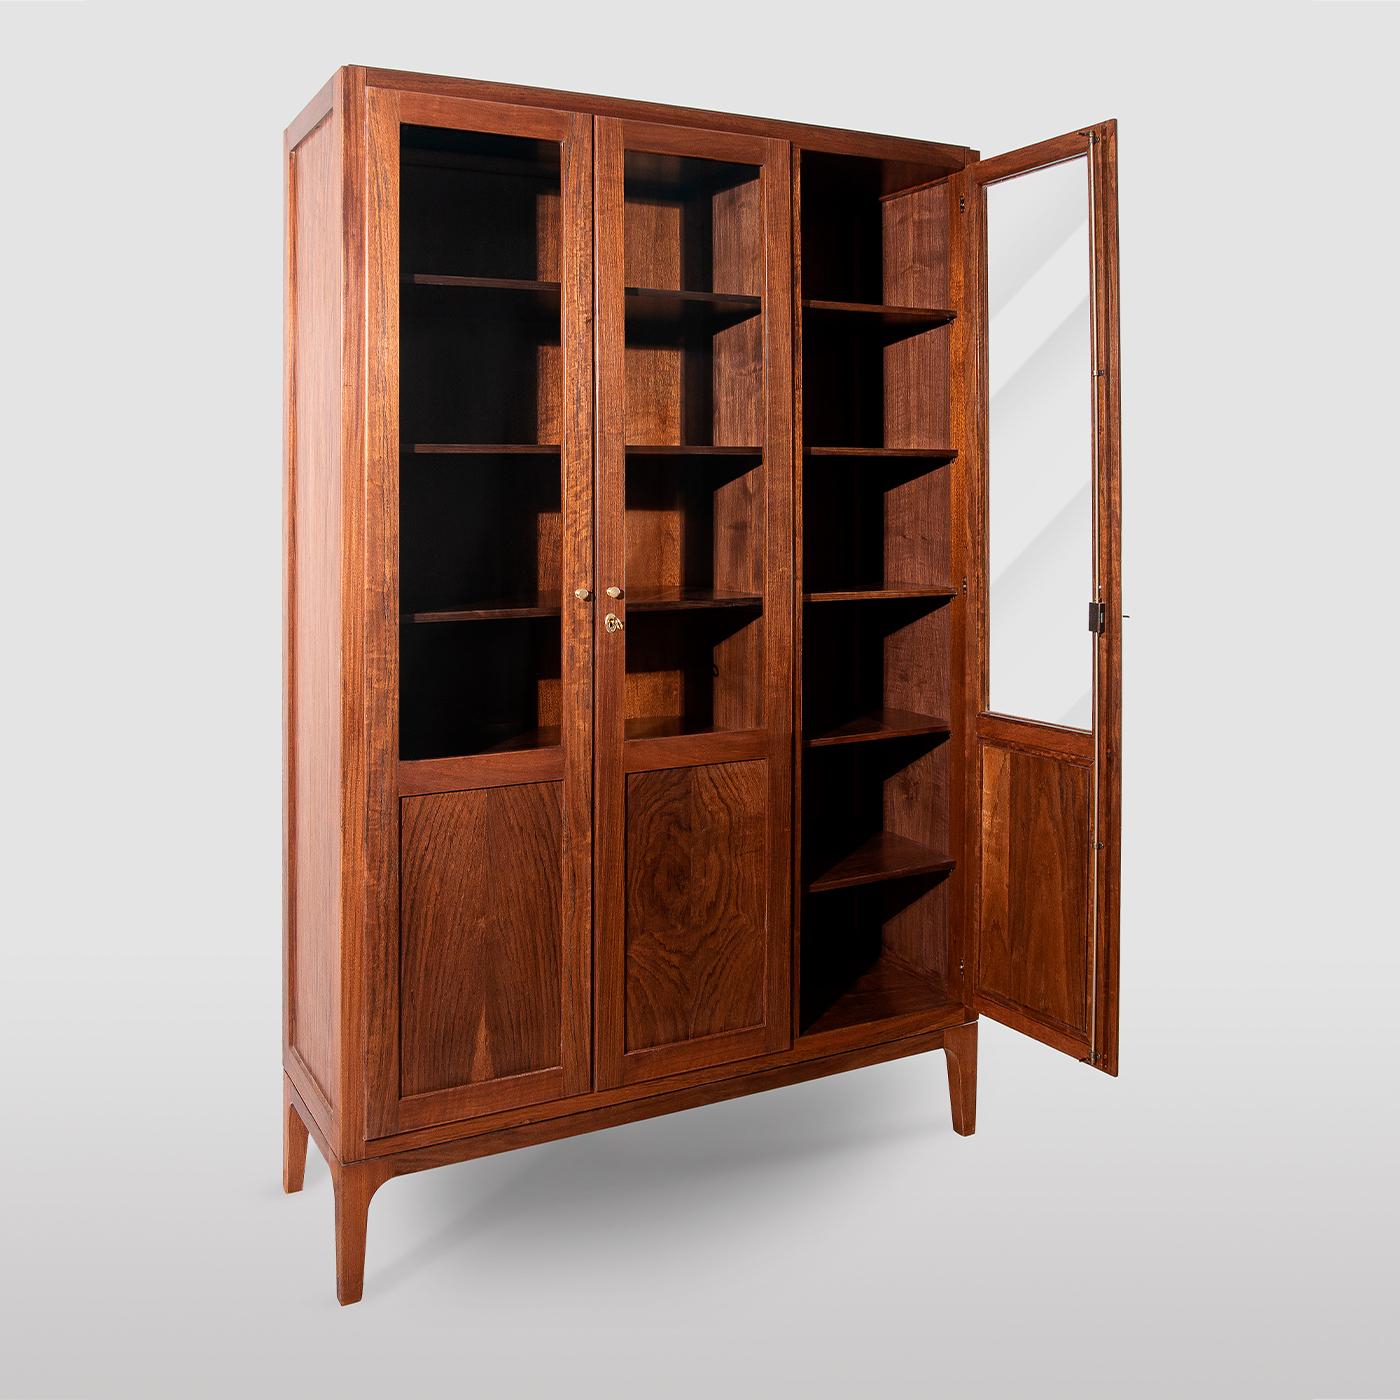 Handcrafted of solid Daniela walnut, this remarkable bookcase is the epitome of artisan cabinetry. The linear silhouette and minimal details allow the rich wood grain to take center stage. Equipped with ten shelves and an inner divider, the storage